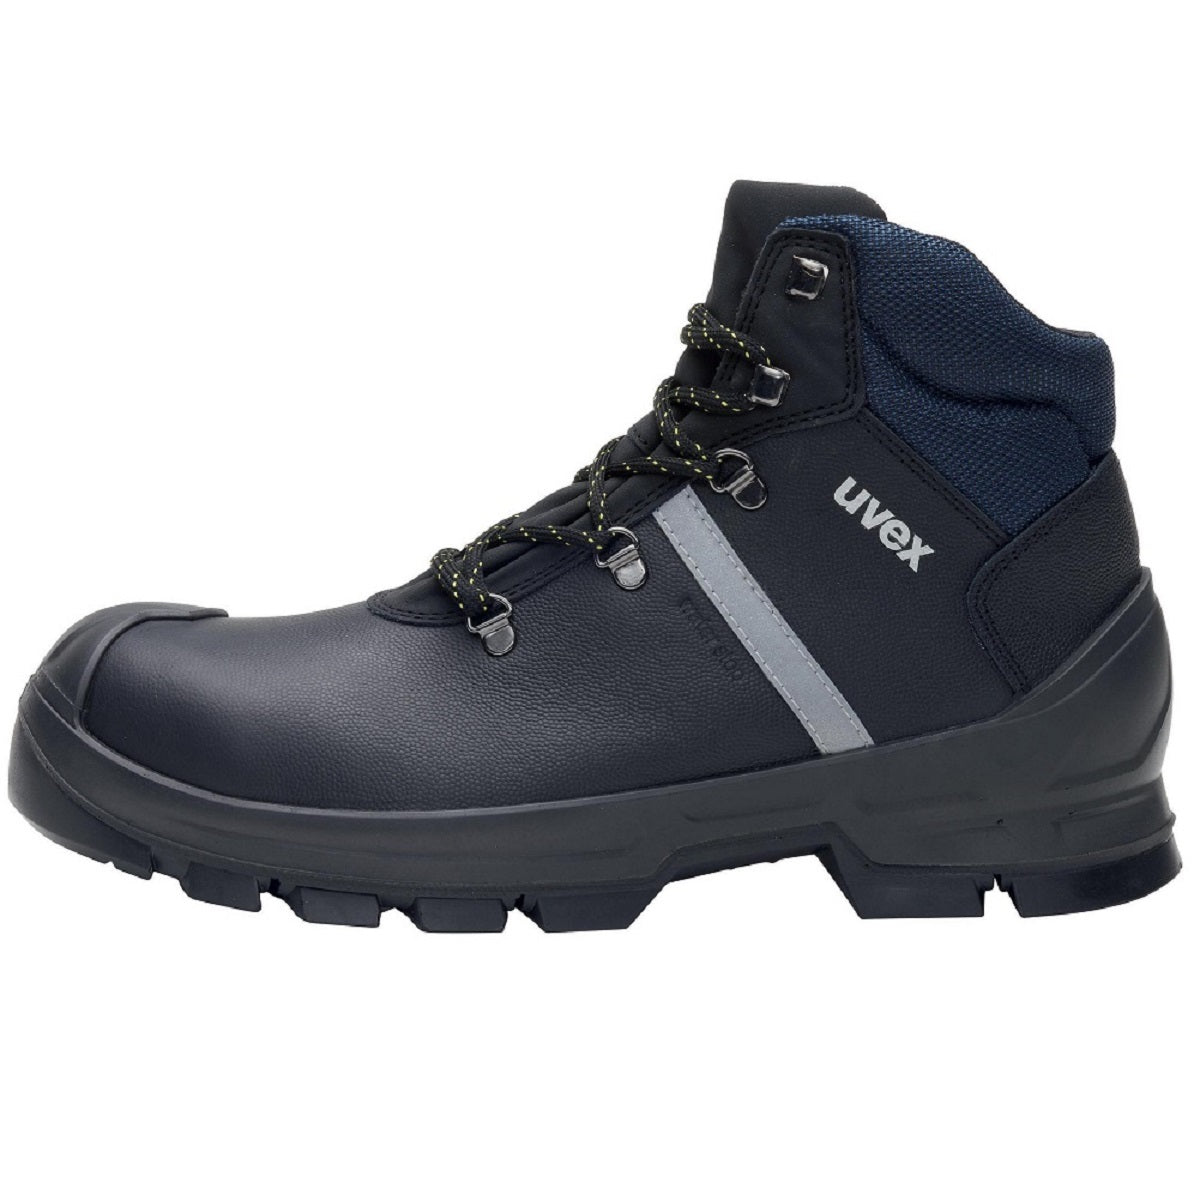 65122 uvex 2 construction leather industrial safety boots S3 SRC protexu left side view